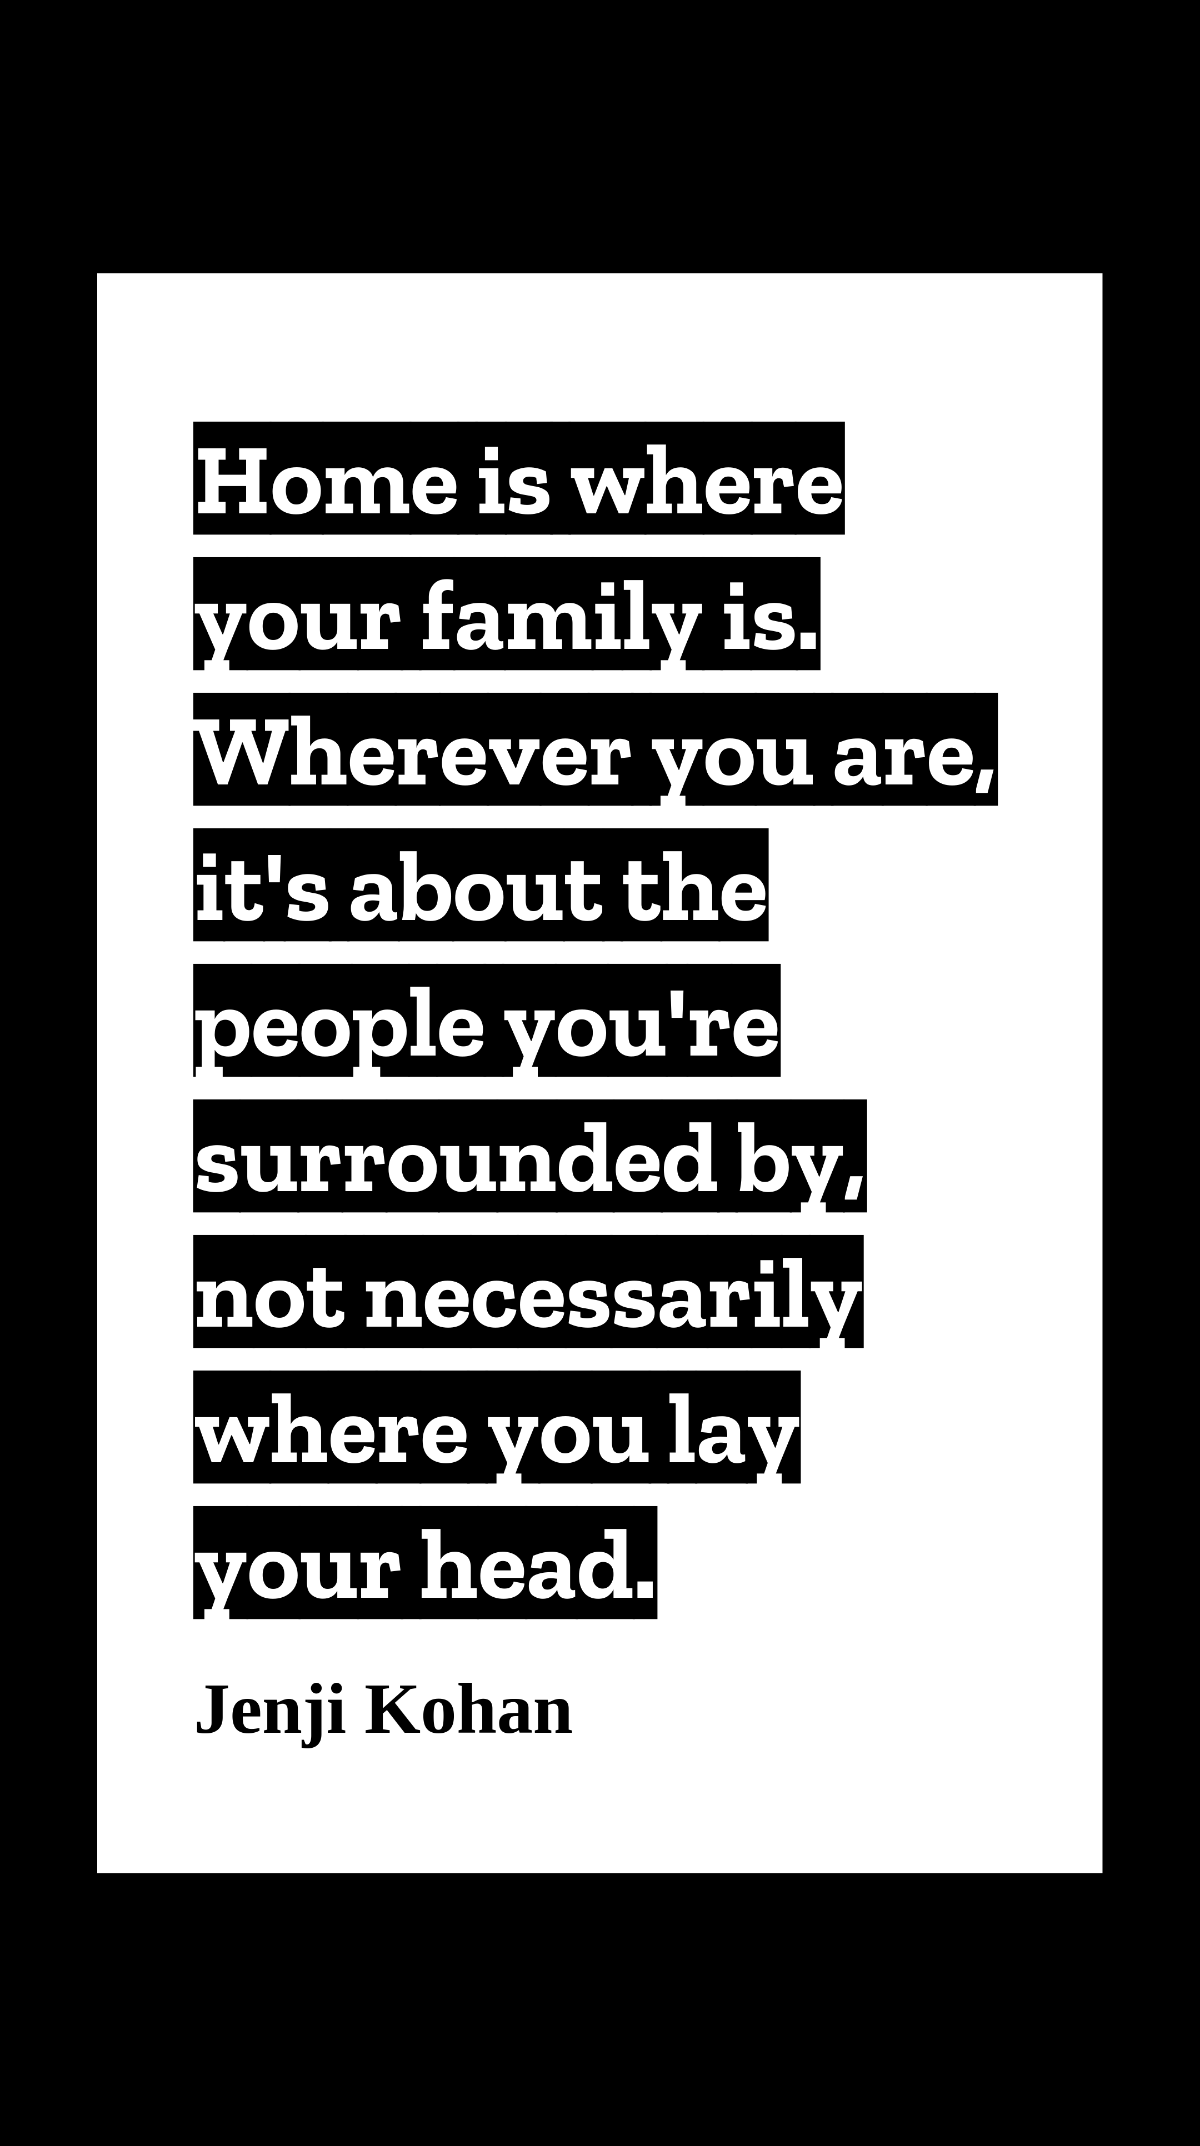 Jenji Kohan - Home is where your family is. Wherever you are, it's about the people you're surrounded by, not necessarily where you lay your head. Template